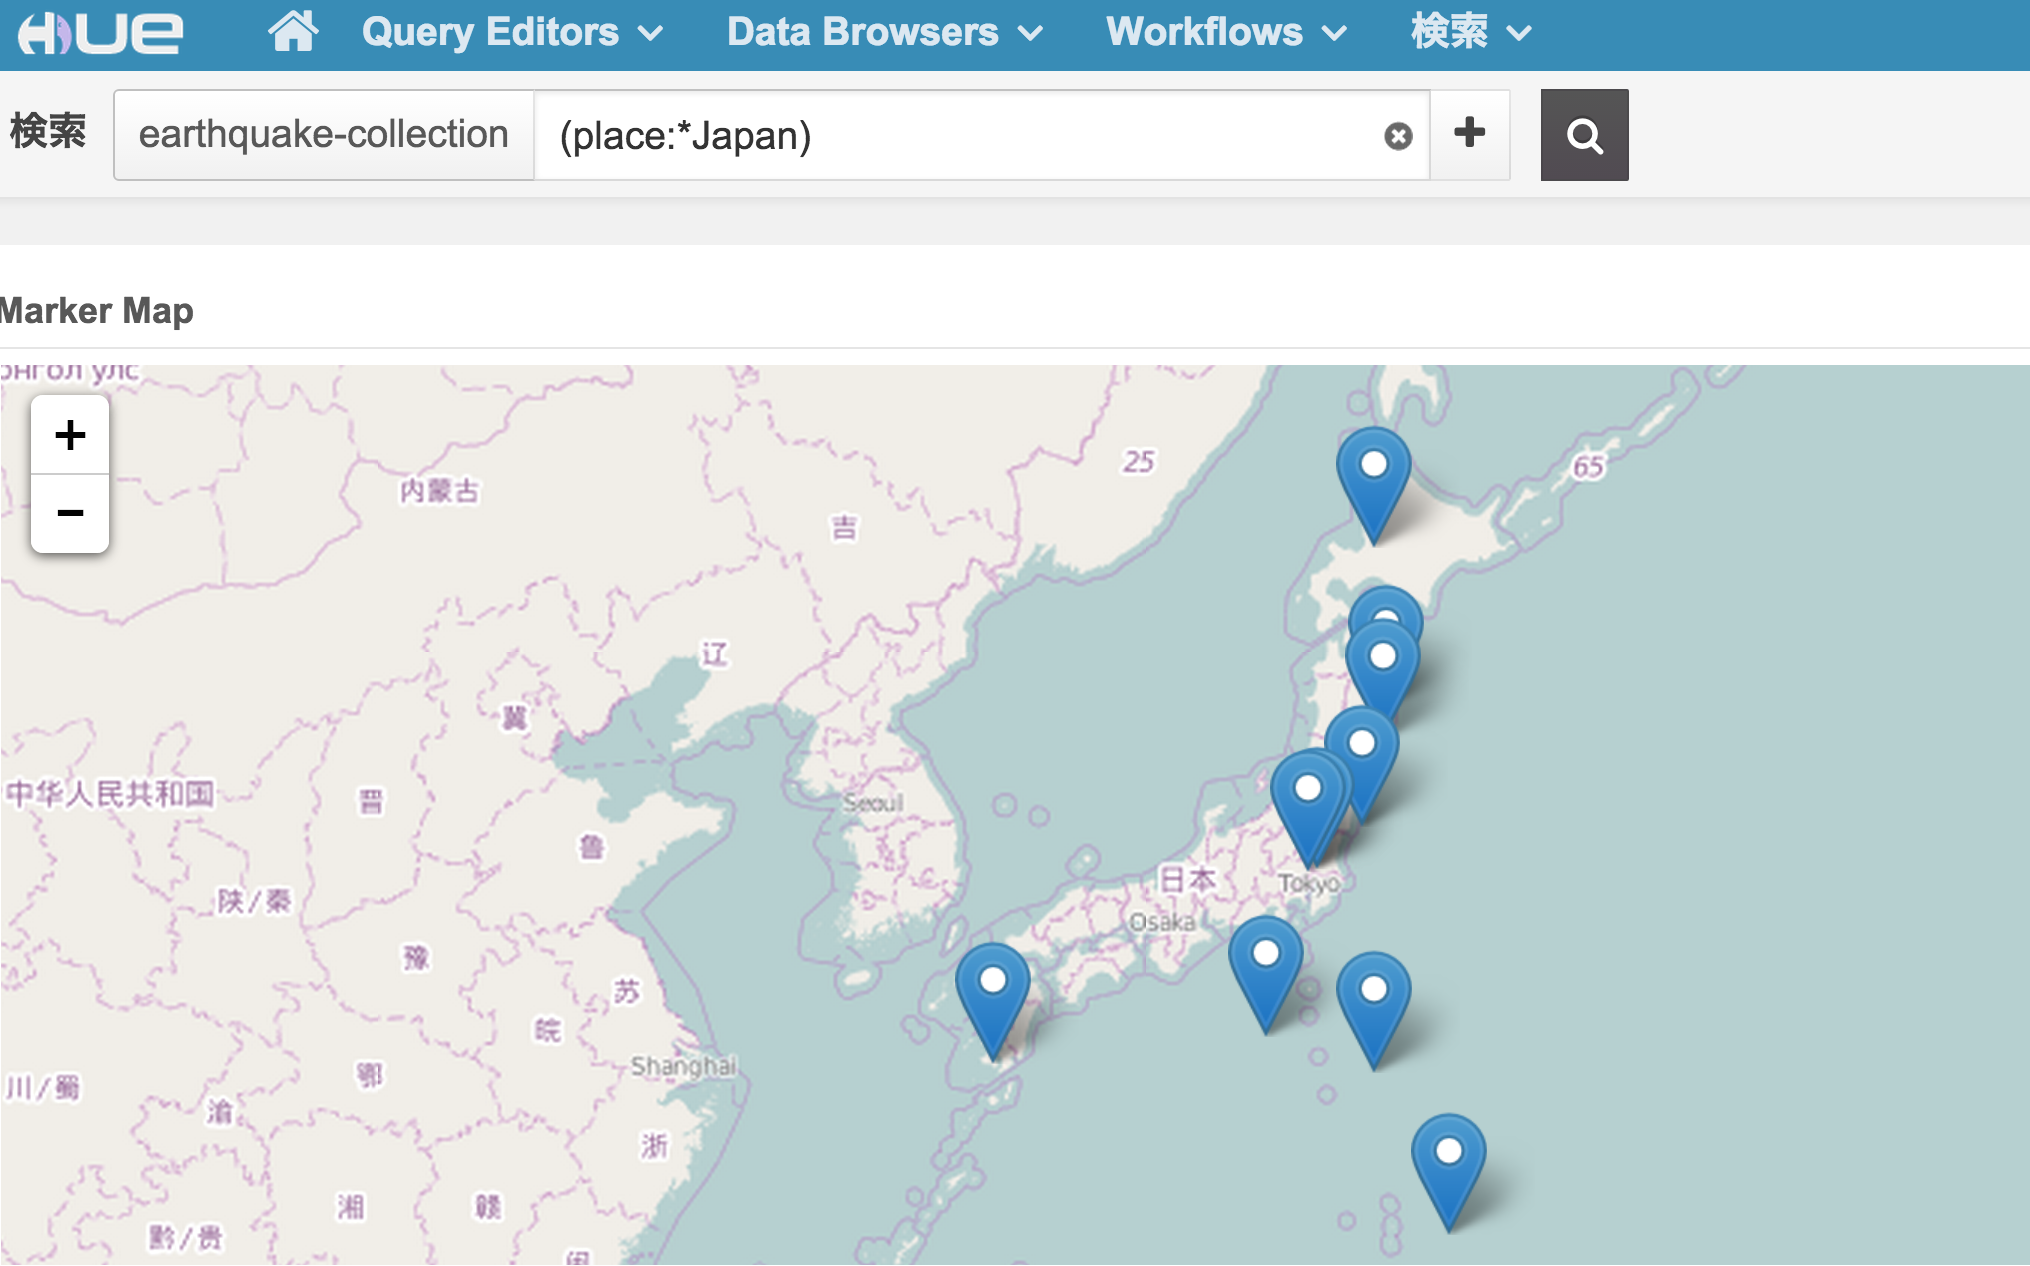 c54-hue-search-search-marker-map-japan-2.png